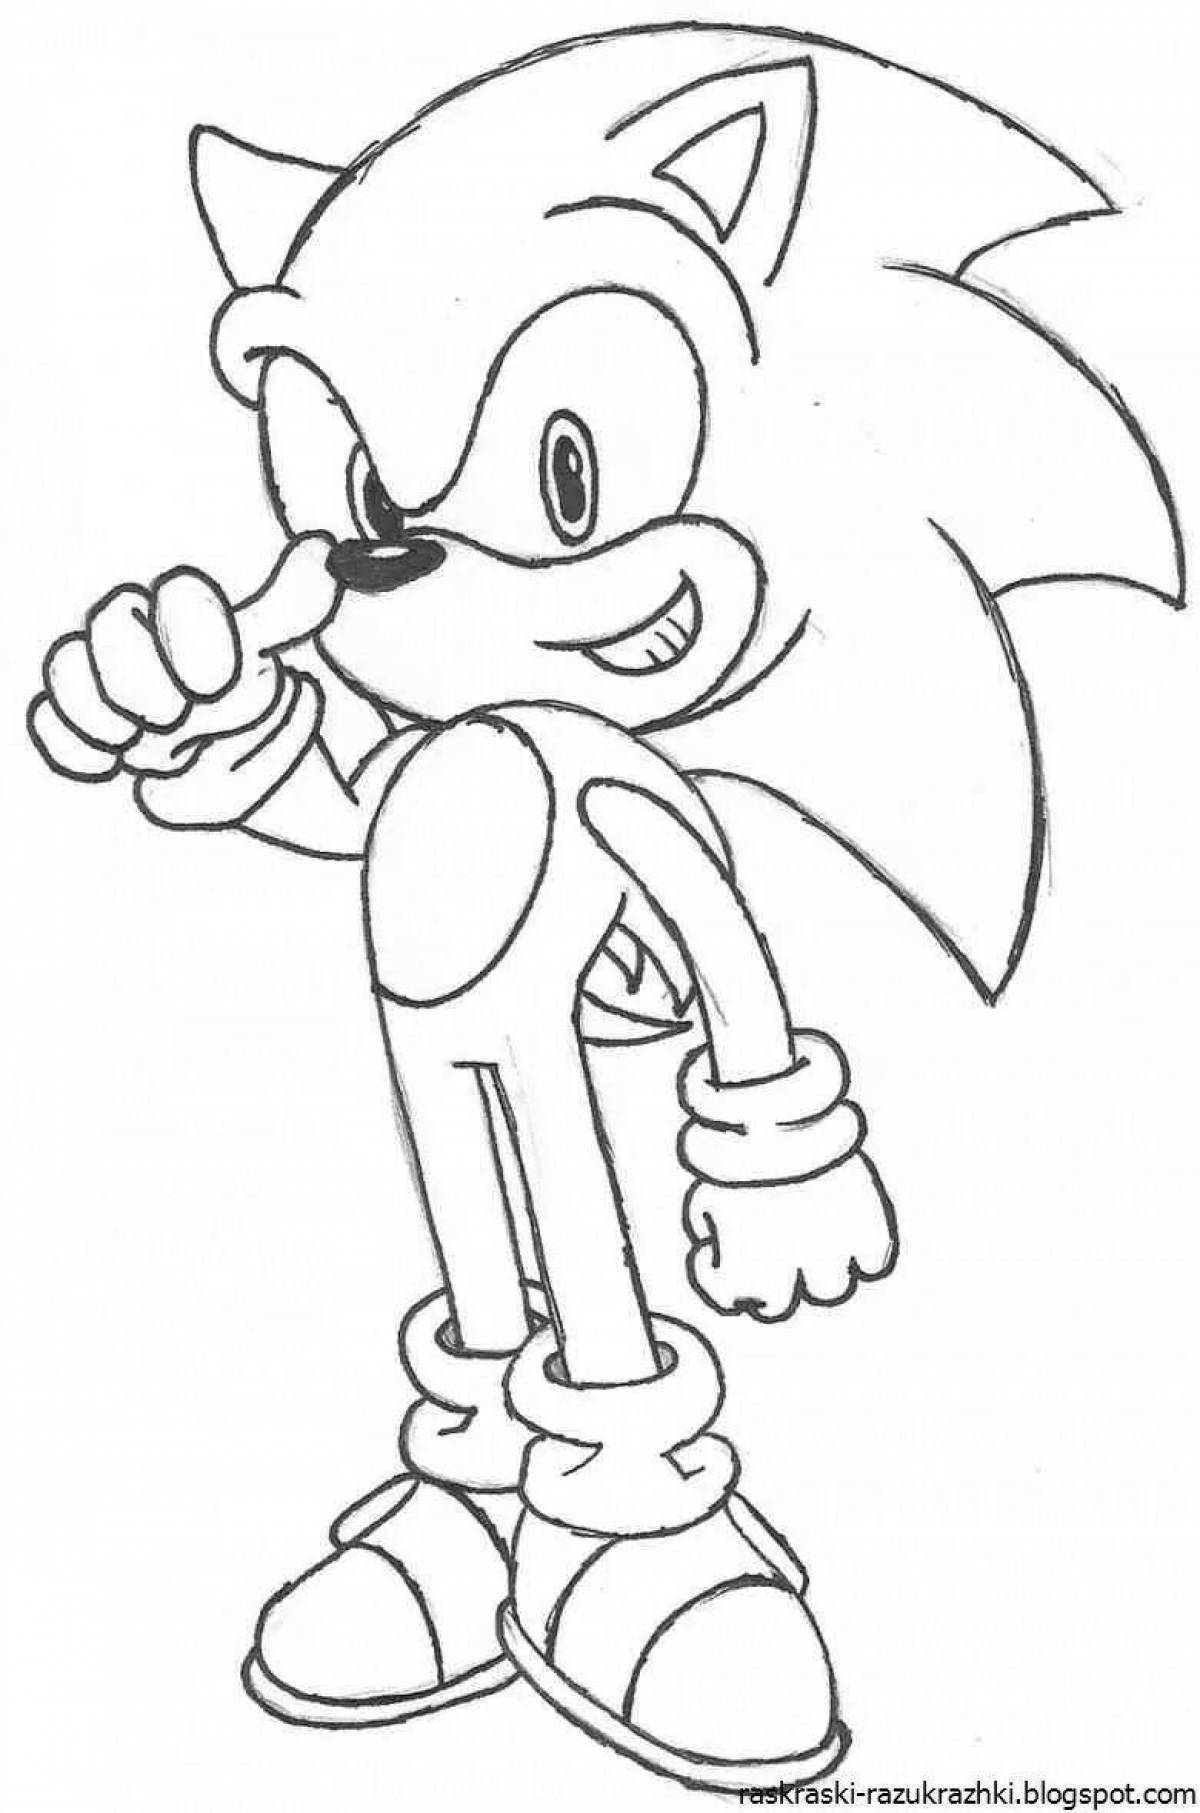 Charming sonic coloring book for kids 5-6 years old